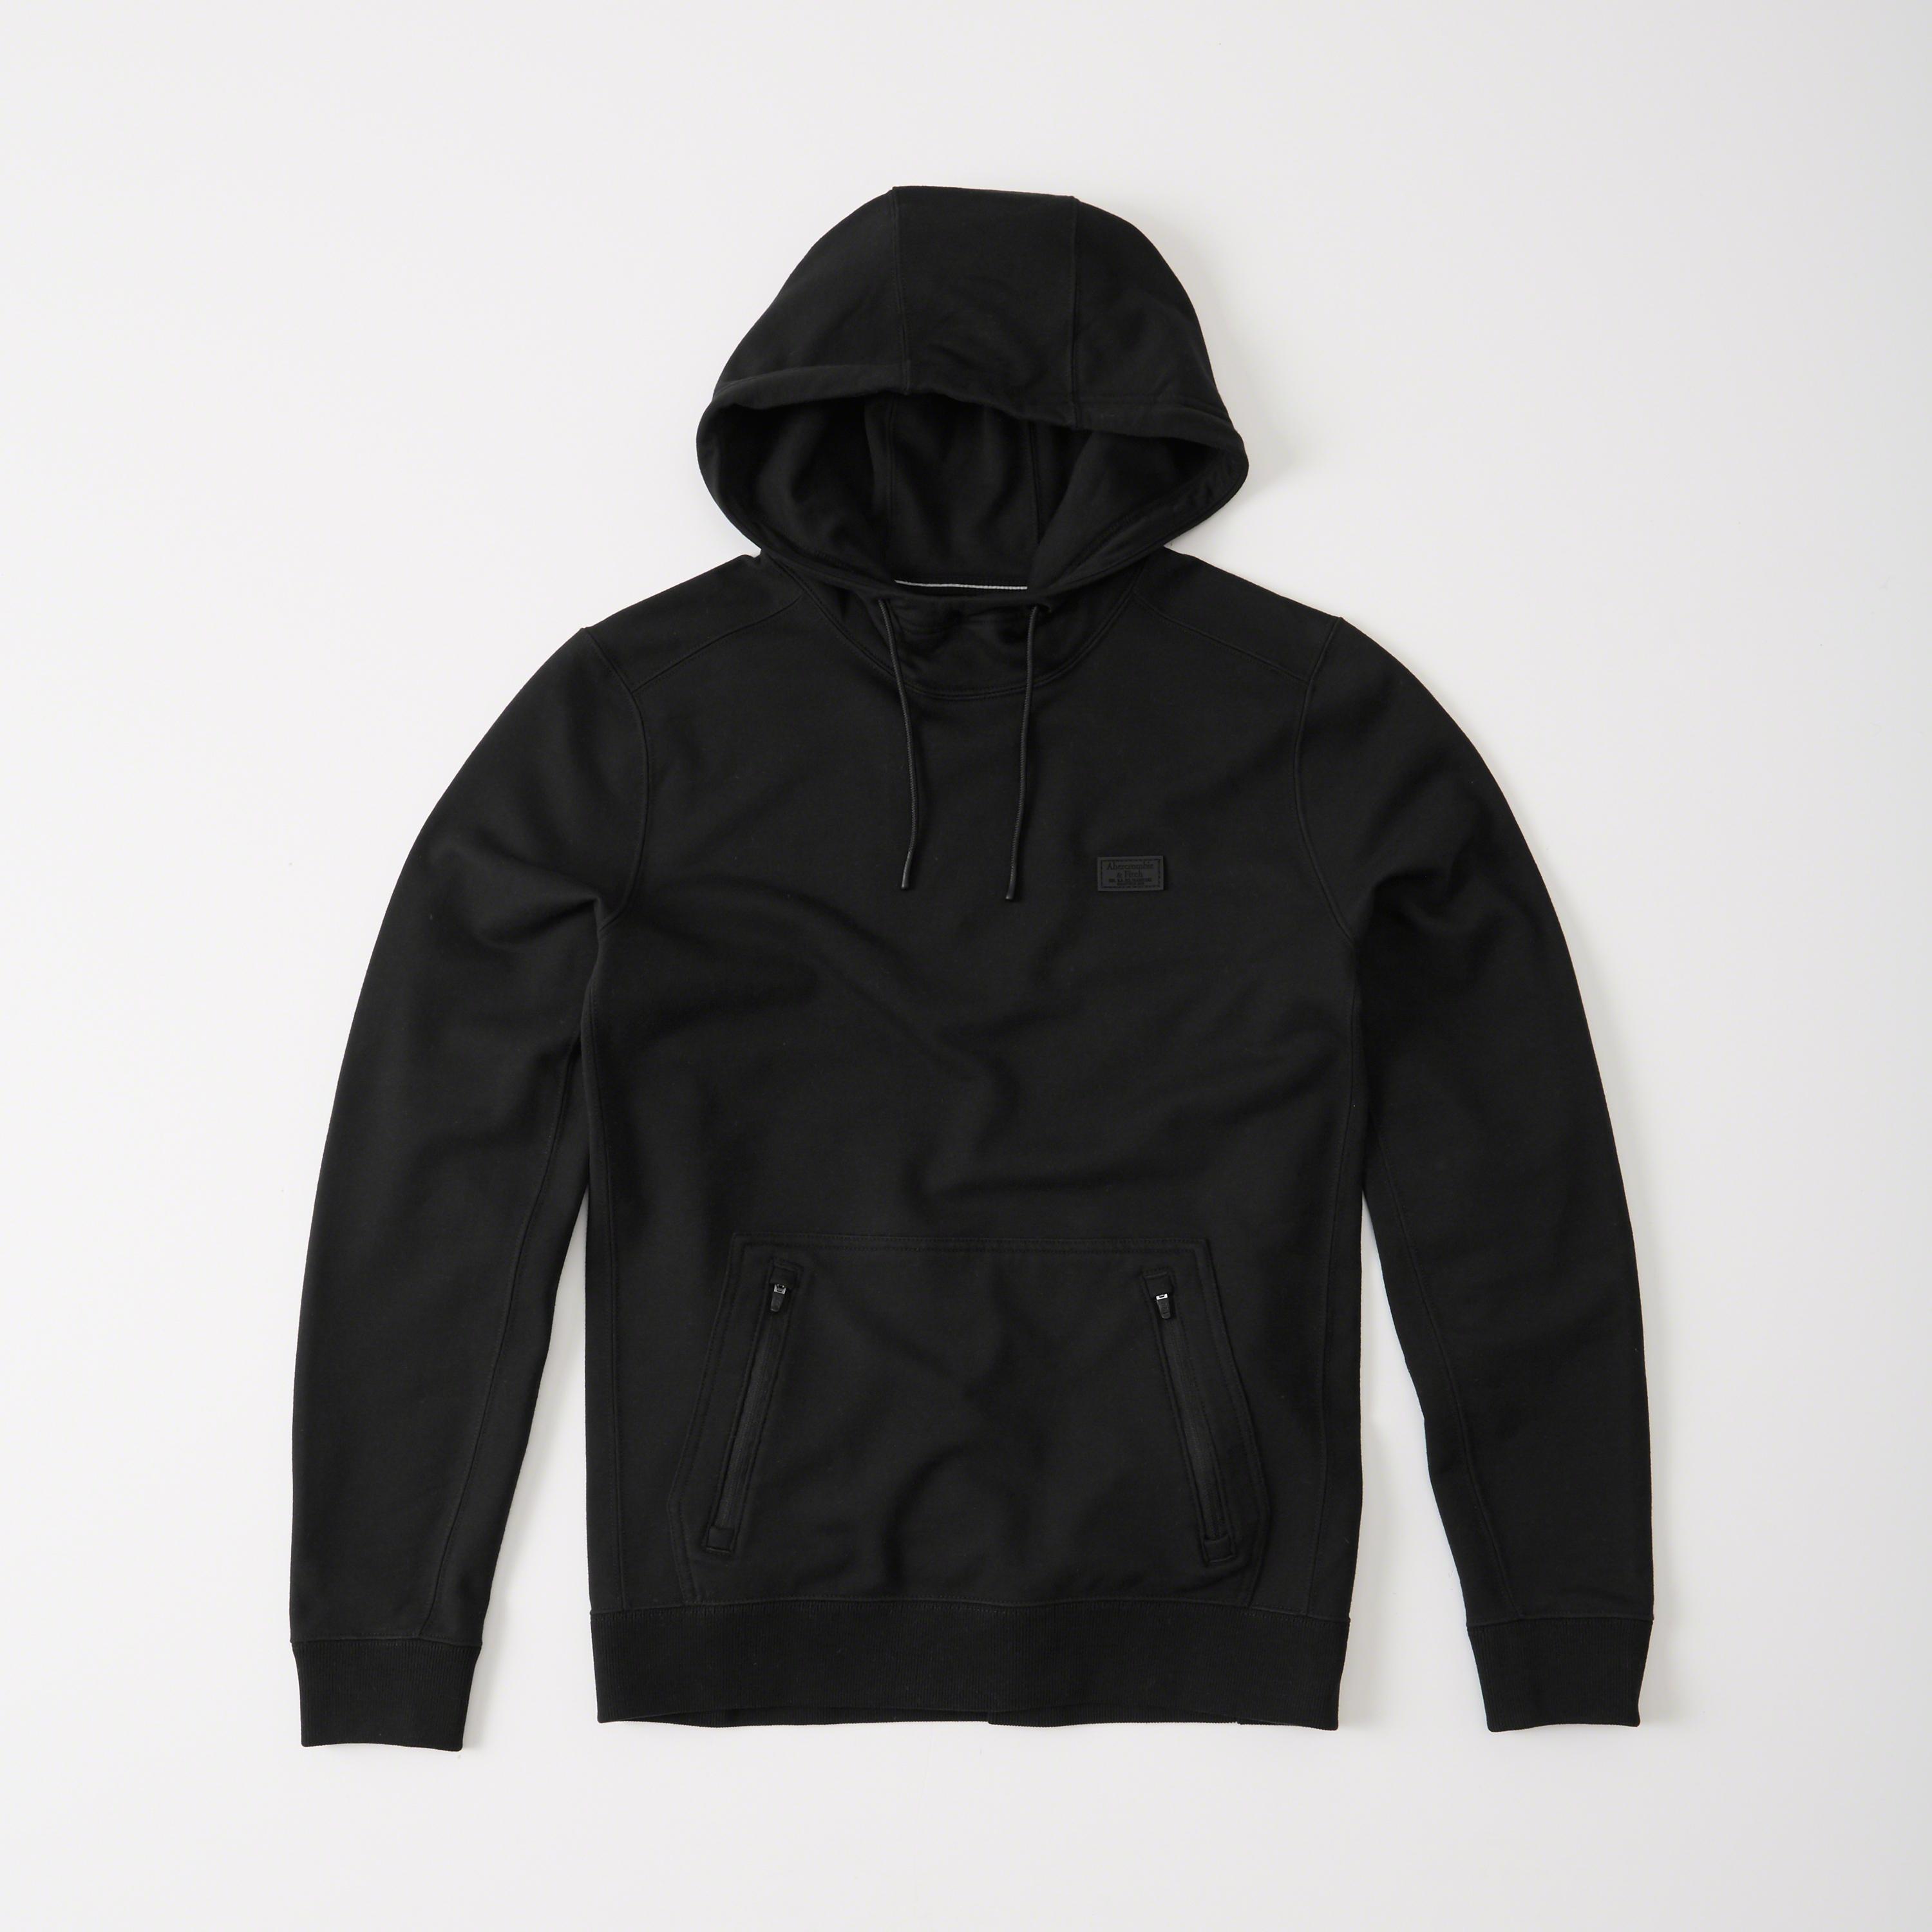 Lyst - Abercrombie & fitch Sport Hoodie in Black for Men